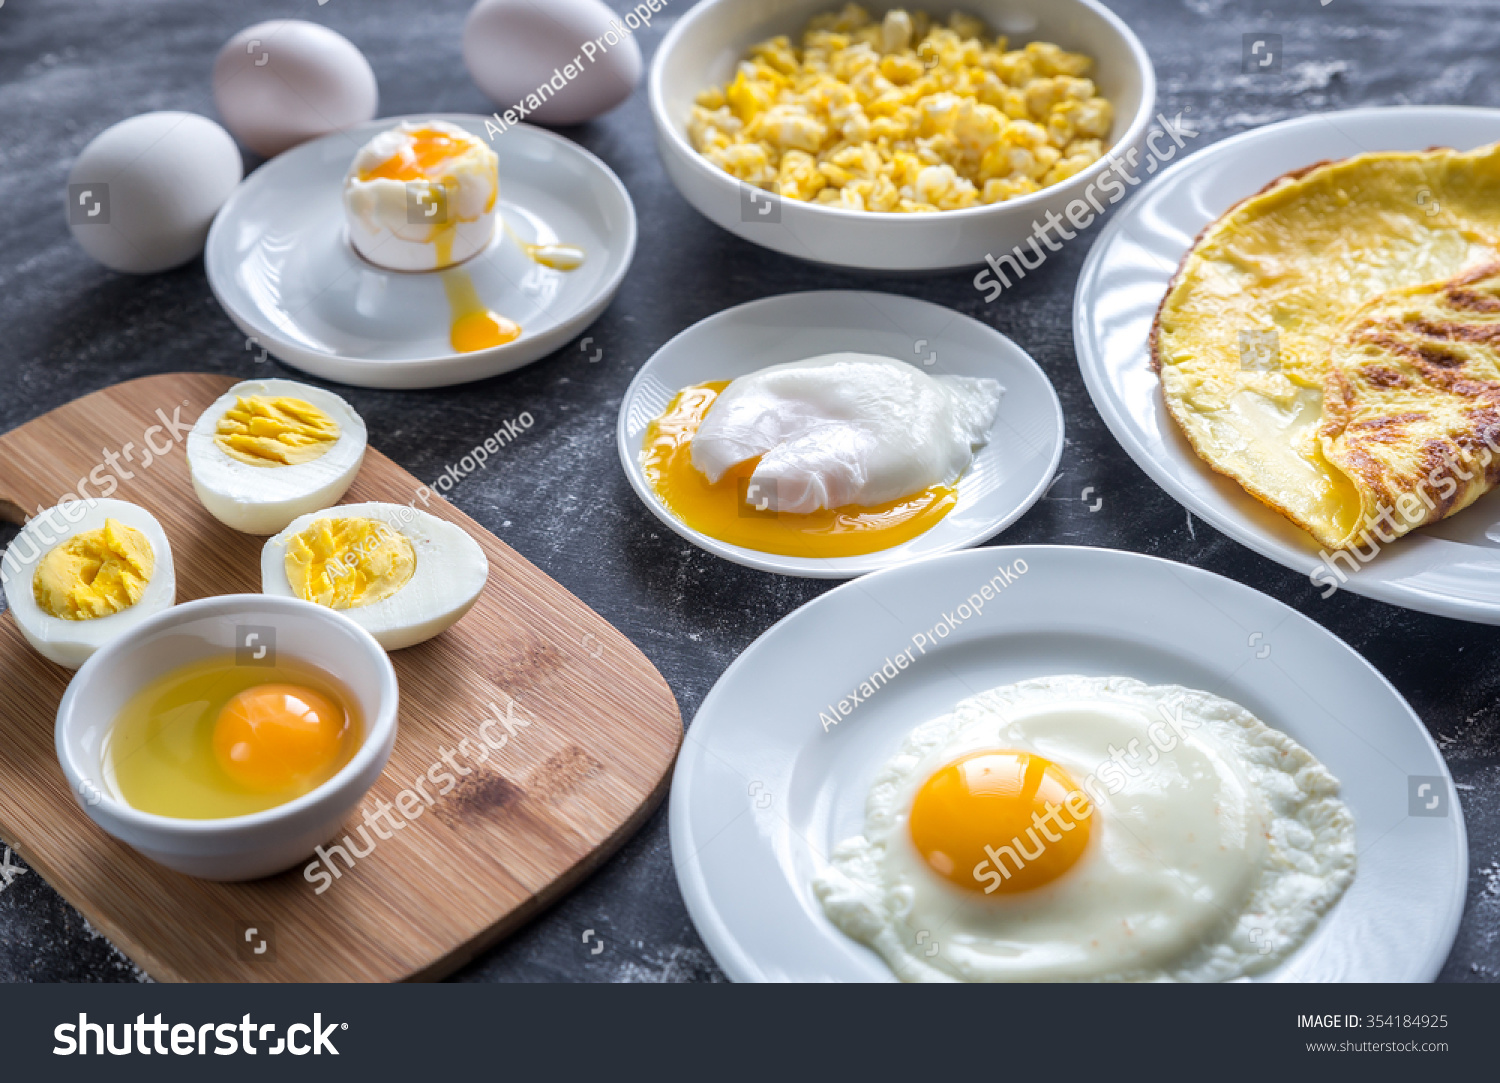 Different ways of cooking eggs #354184925